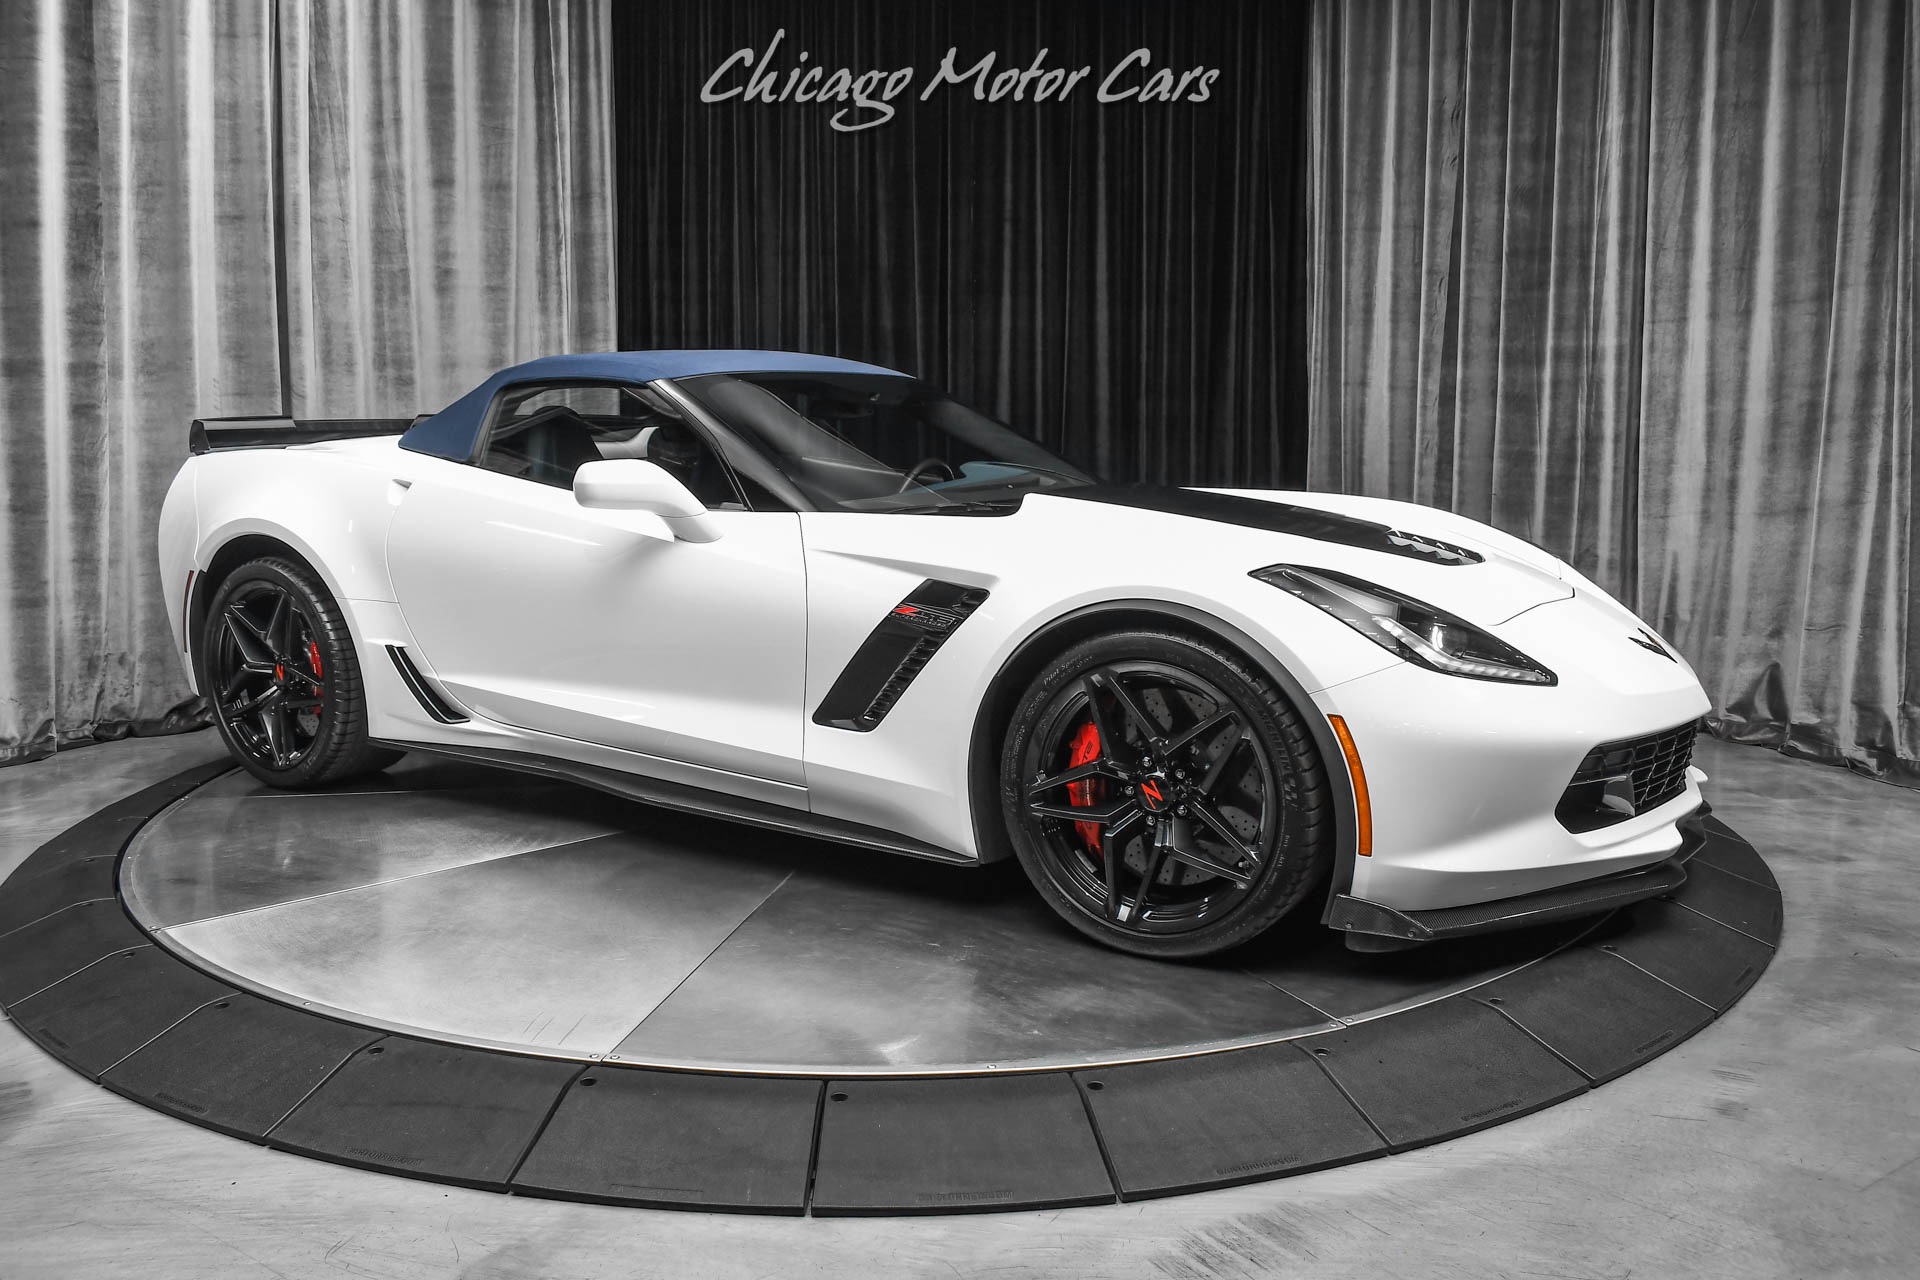 Used-2015-Chevrolet-Corvette-Z06-3LZ-Convertible-Z07-Package-MSRP-107340-White-with-Blue-Interior